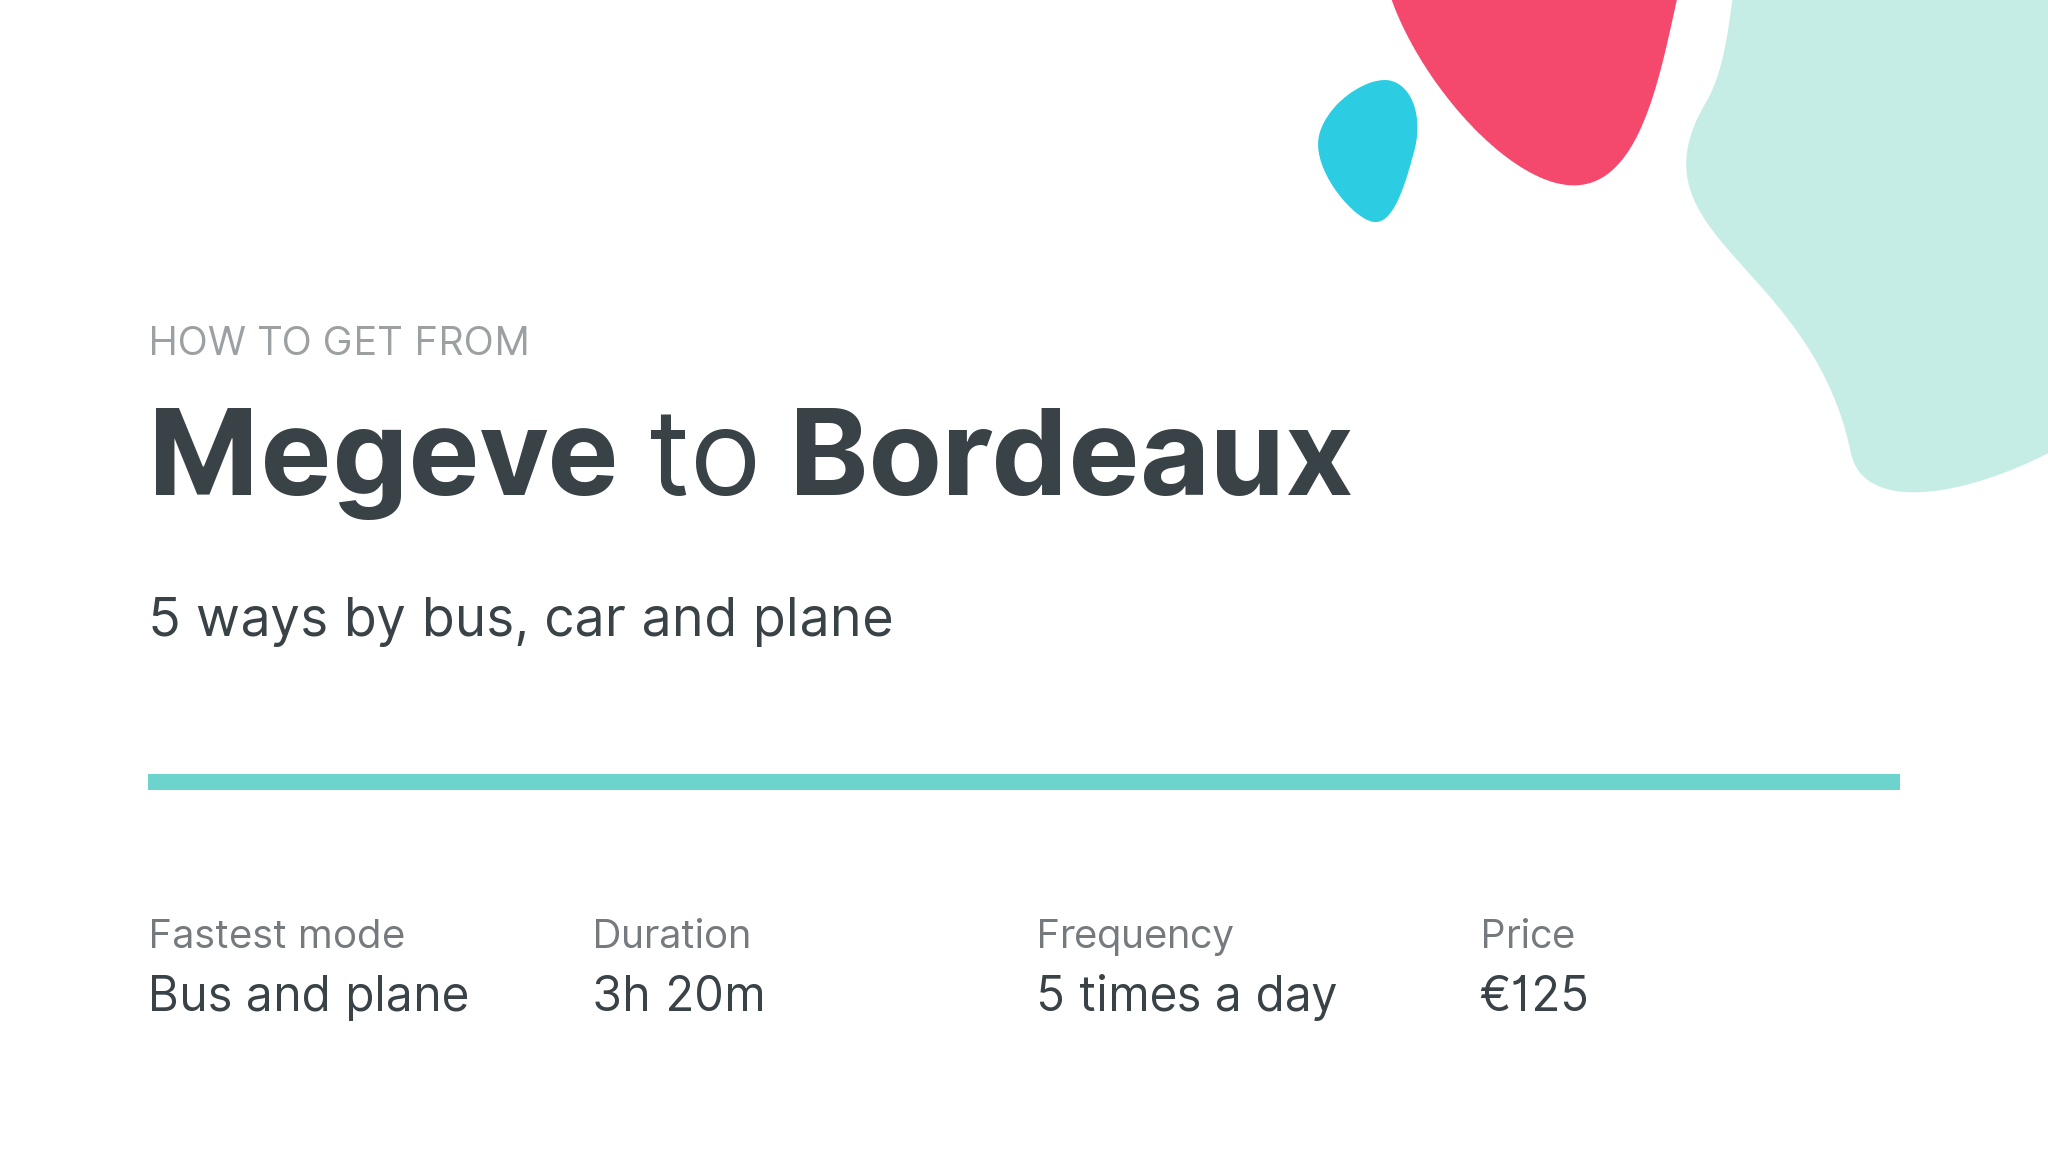 How do I get from Megeve to Bordeaux